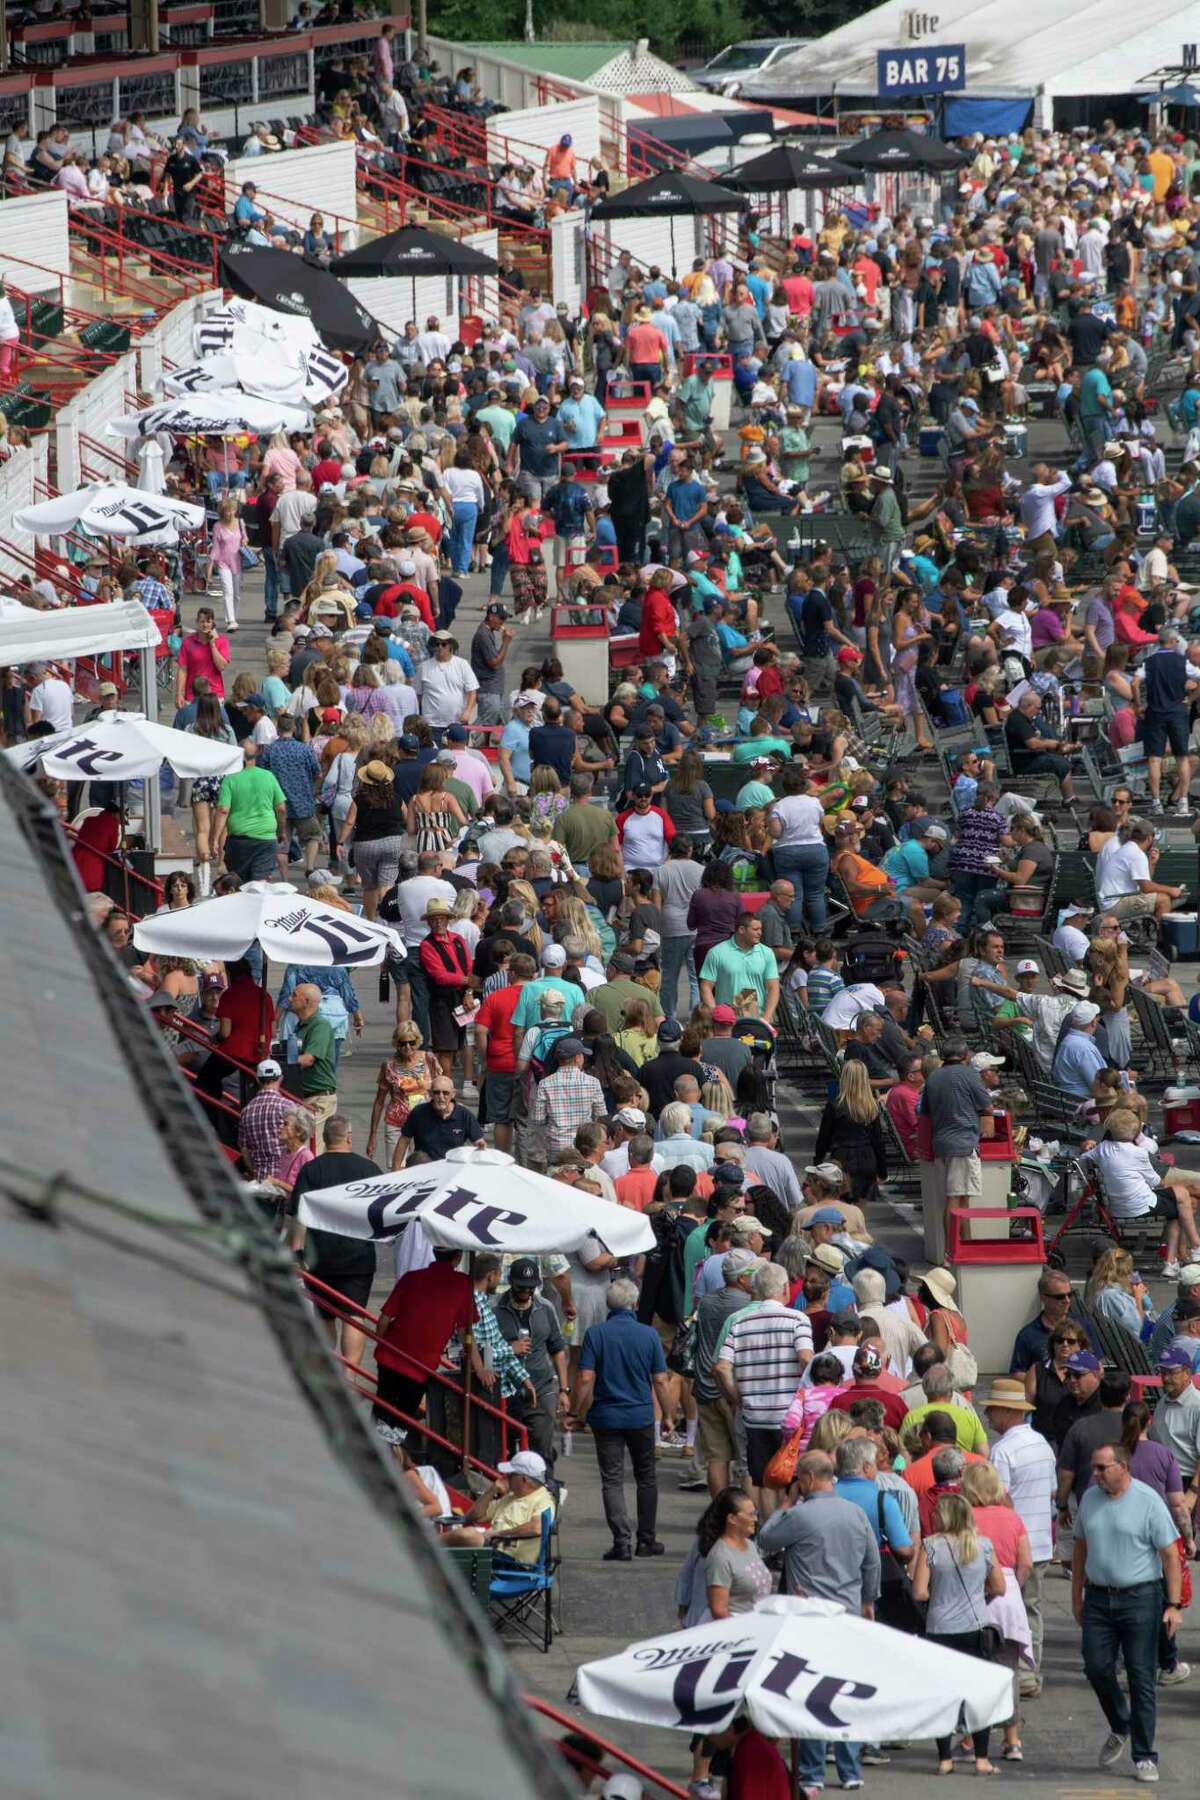 A huge line forms near the umbrellas at the Saratoga Race Course on sweatshirt giveaway day Sunday Sept. 1, 2019 in Saratoga Springs, N.Y. Photo Special to the Times Union by Skip Dickstein